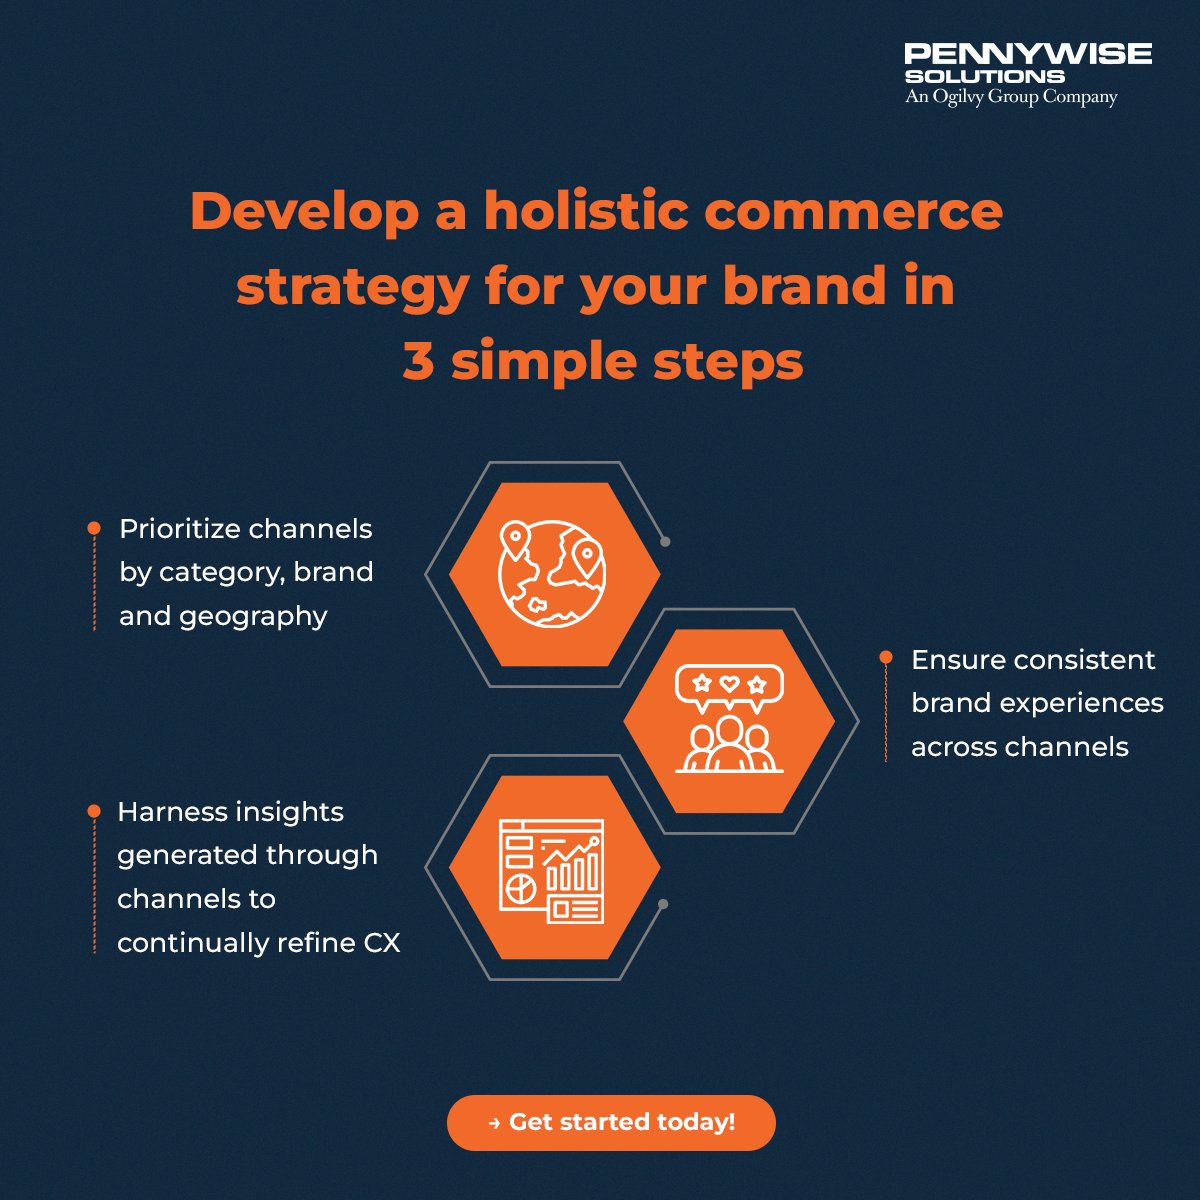 Looking to develop a successful #commercestrategy for your brand? Follow these three simple steps to build the perfect foundation.

Get in touch today - bit.ly/2RrfkqB

#PennyWise #DigitalCommerce #eCommerce #Conversions #AdobeCommerce #MagentoCommerce #Magento #Adobe